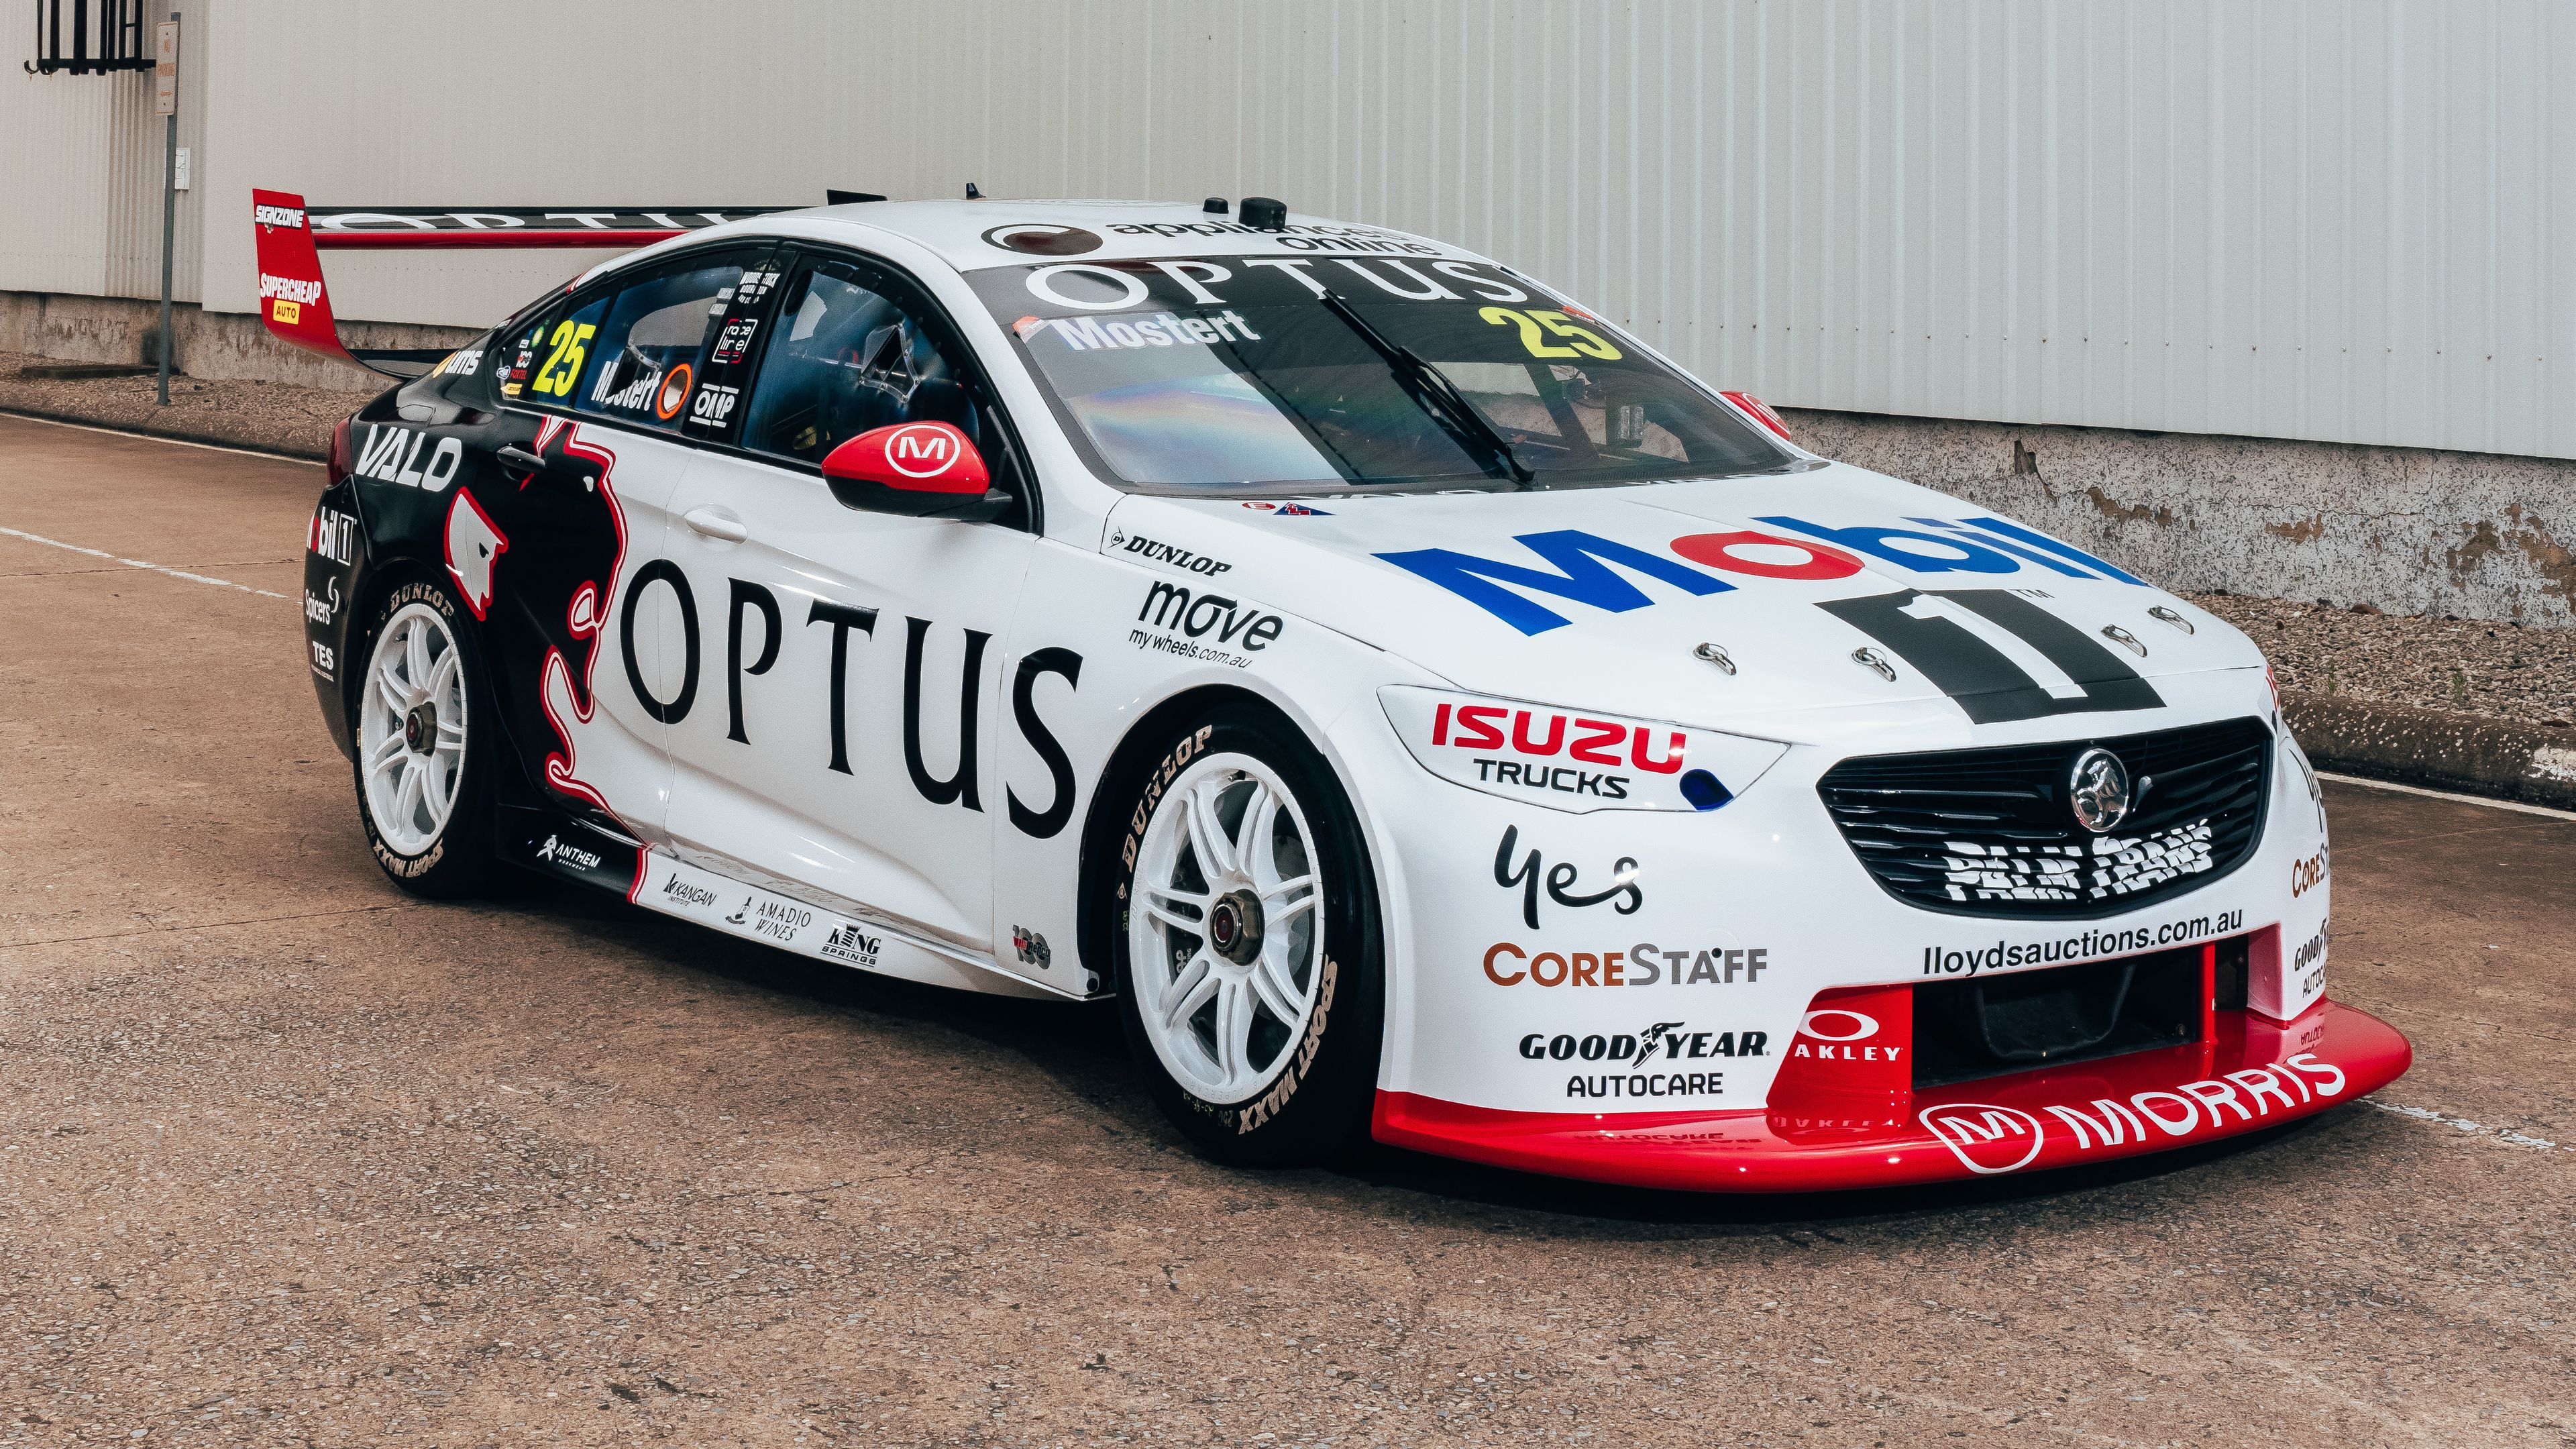 Walkinshaw Andretti United have released their Holden tribute liveries they will run at the Adelaide 500. They ran as the Holden Racing Team for 27 years.